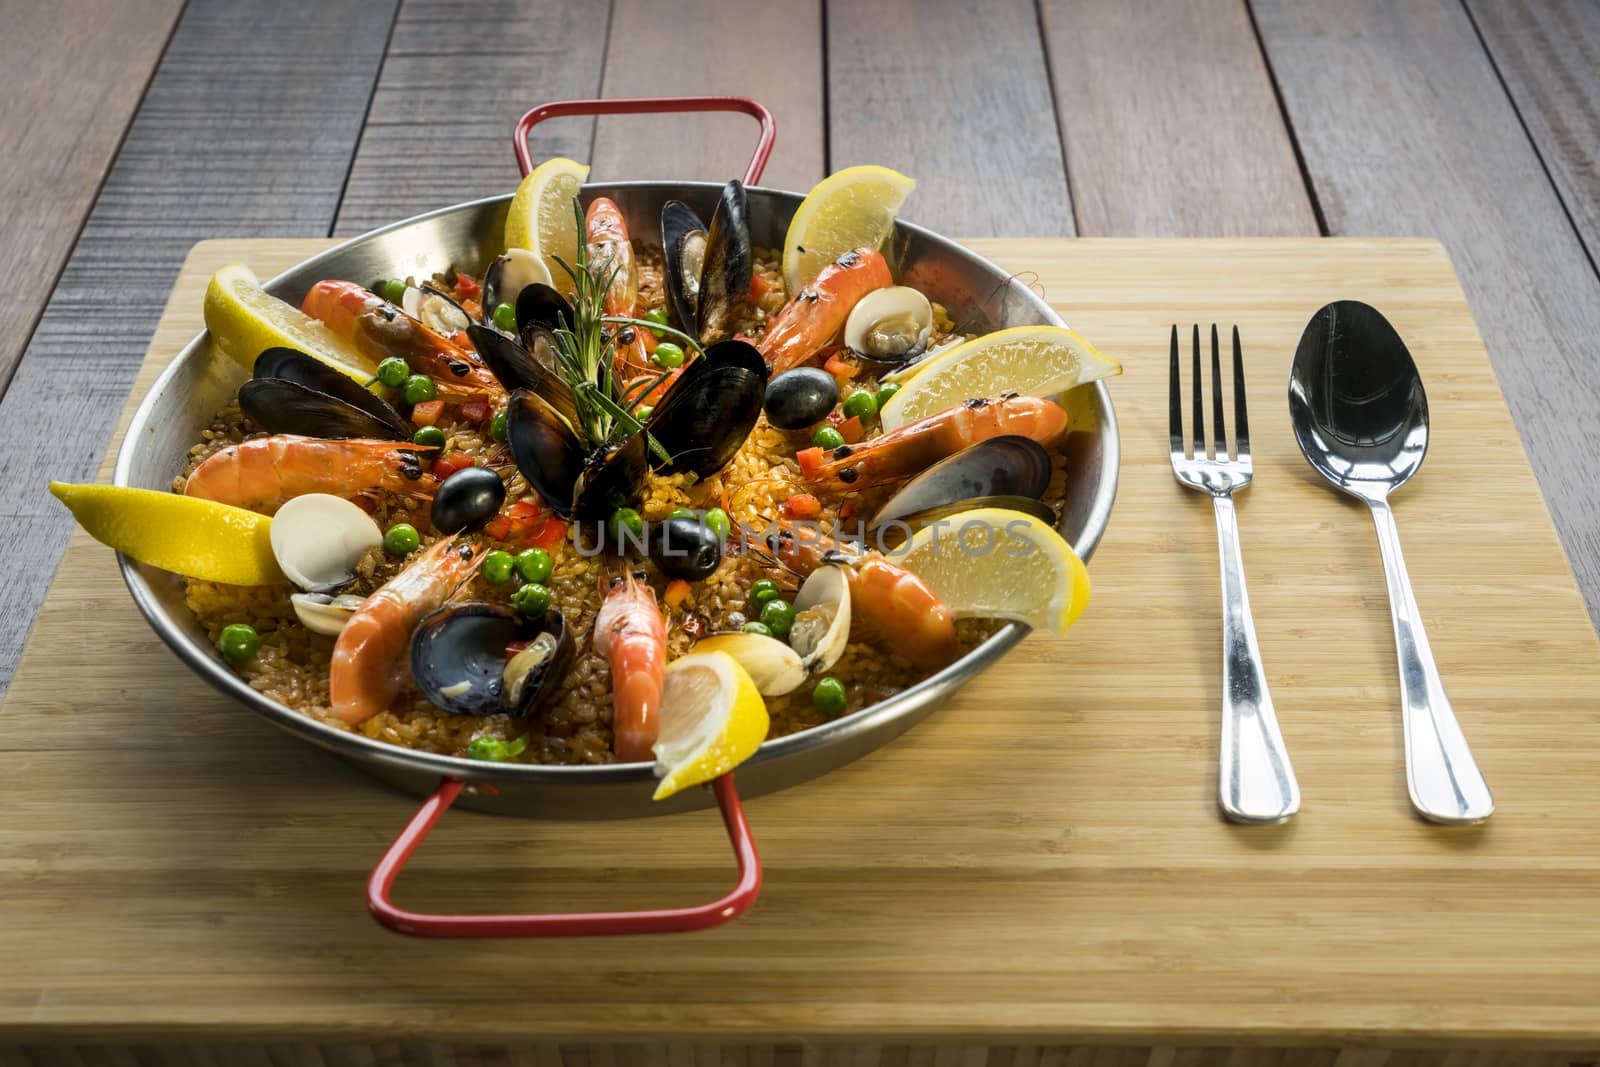 Paella with seafood vegetables and saffron served in the traditional pan